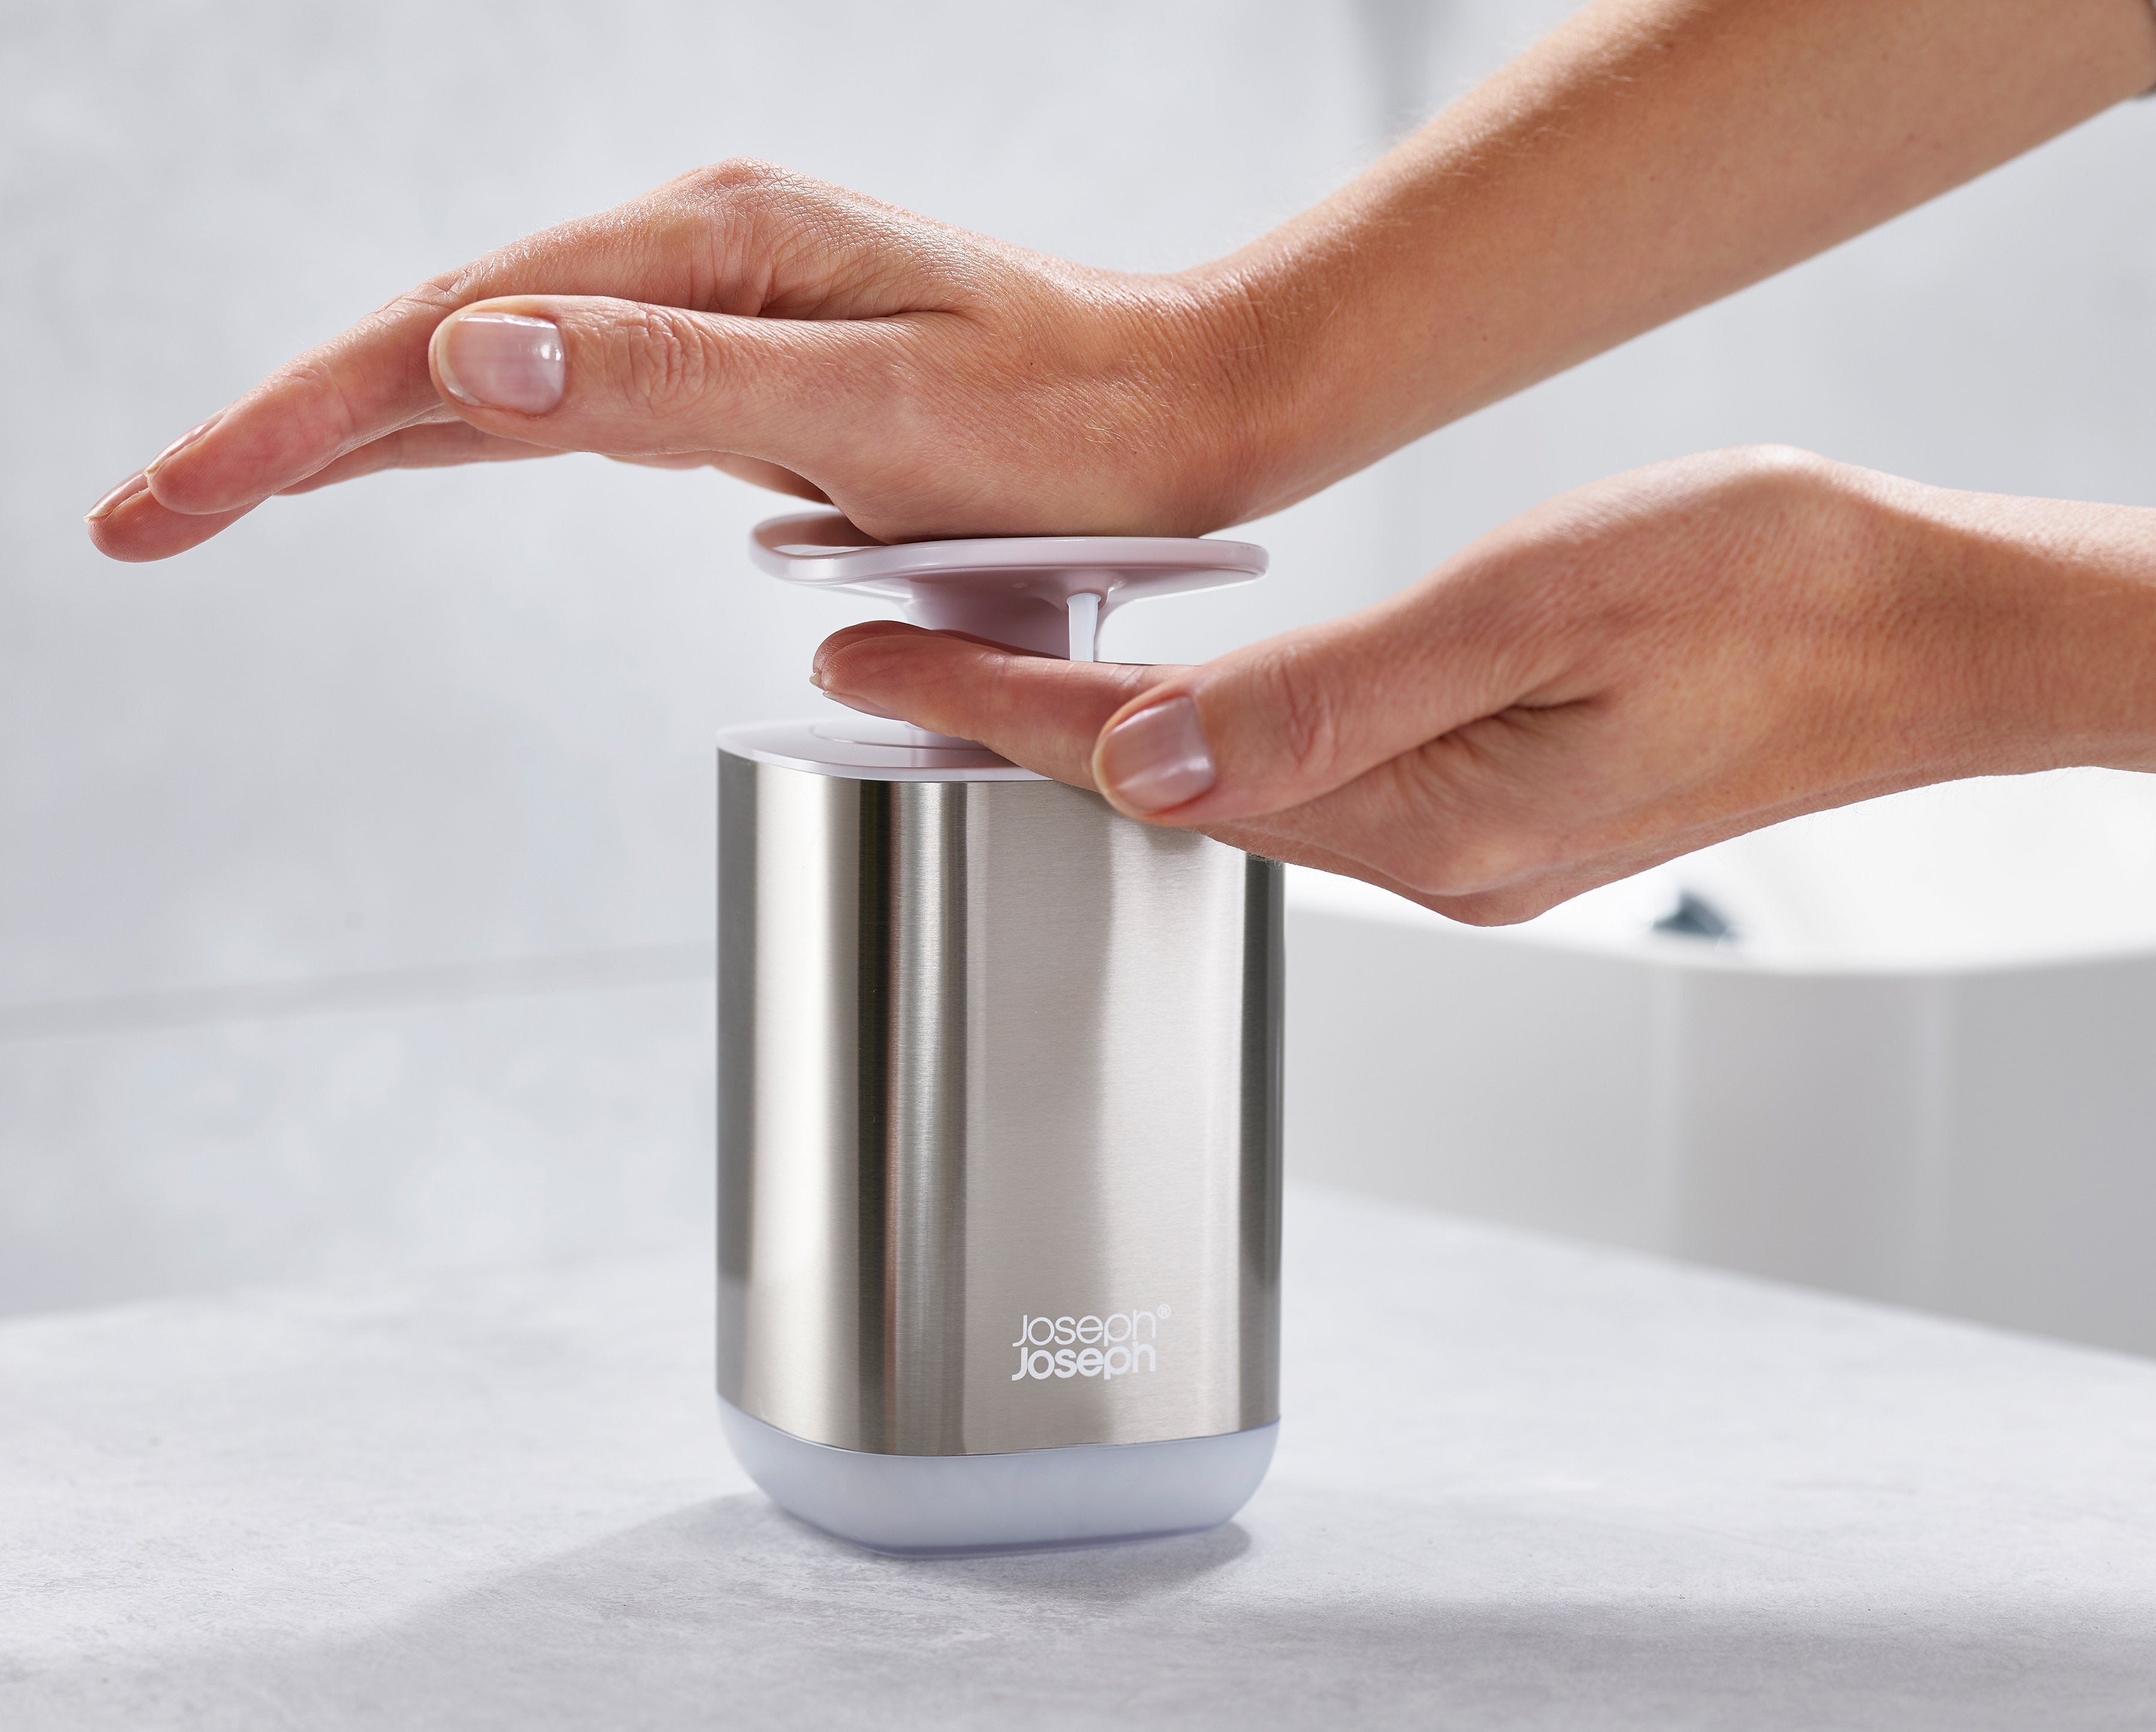 BEON.COM.AU  This clever soap dispenser can easily be operated with your wrist or forearm when your hands are messy.  Large easy-push pump head Push with wrist for optimum hygiene Transparent window for checking fill level Non-slip base Suitable for all types of liquid hand soap  Specifications Care & us... Joseph Joseph at BEON.COM.AU